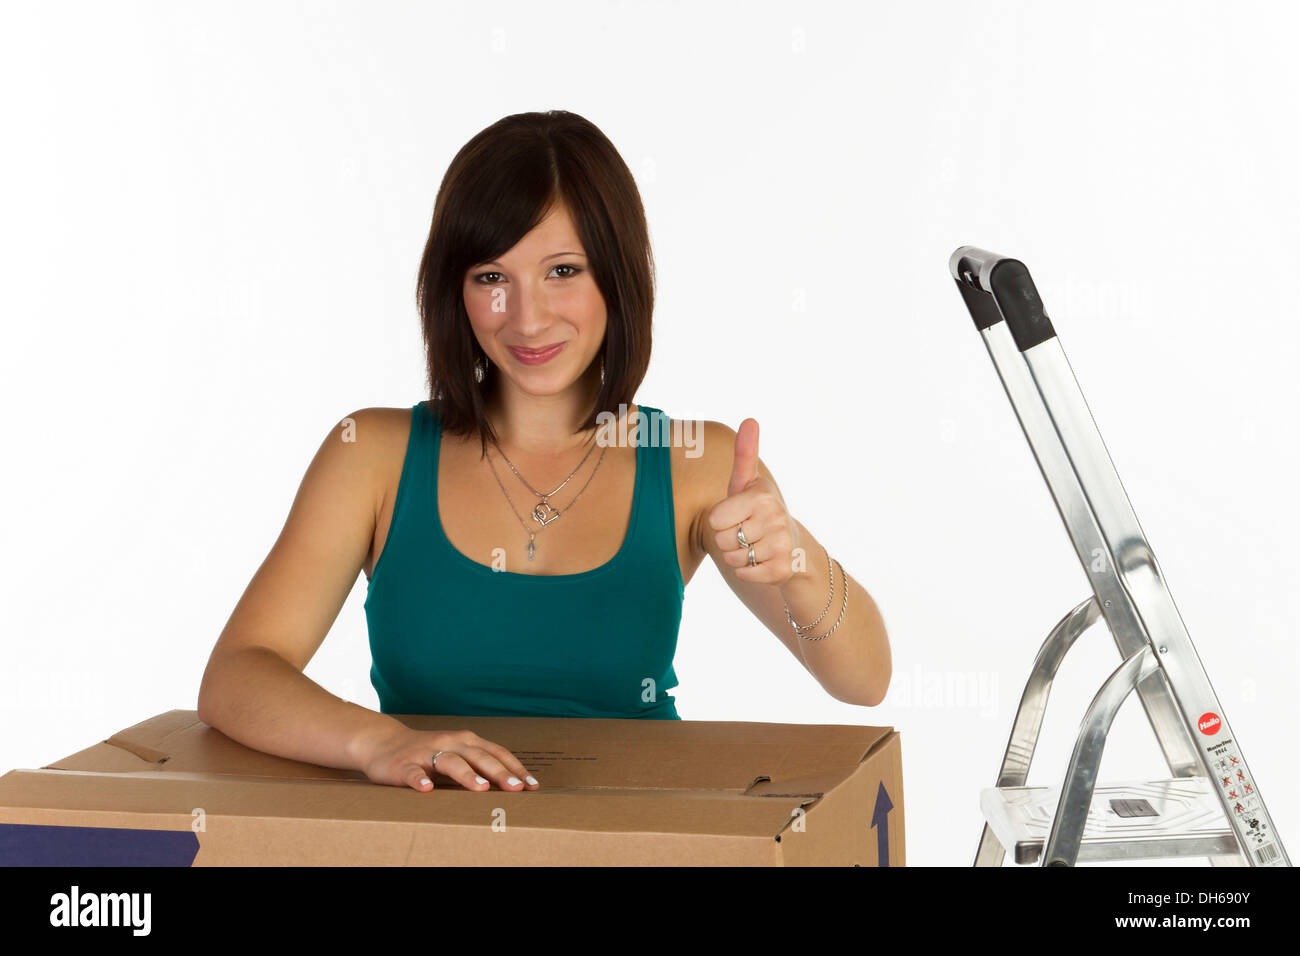 Young woman with a moving box, making a thumbs-up gesture Stock Photo